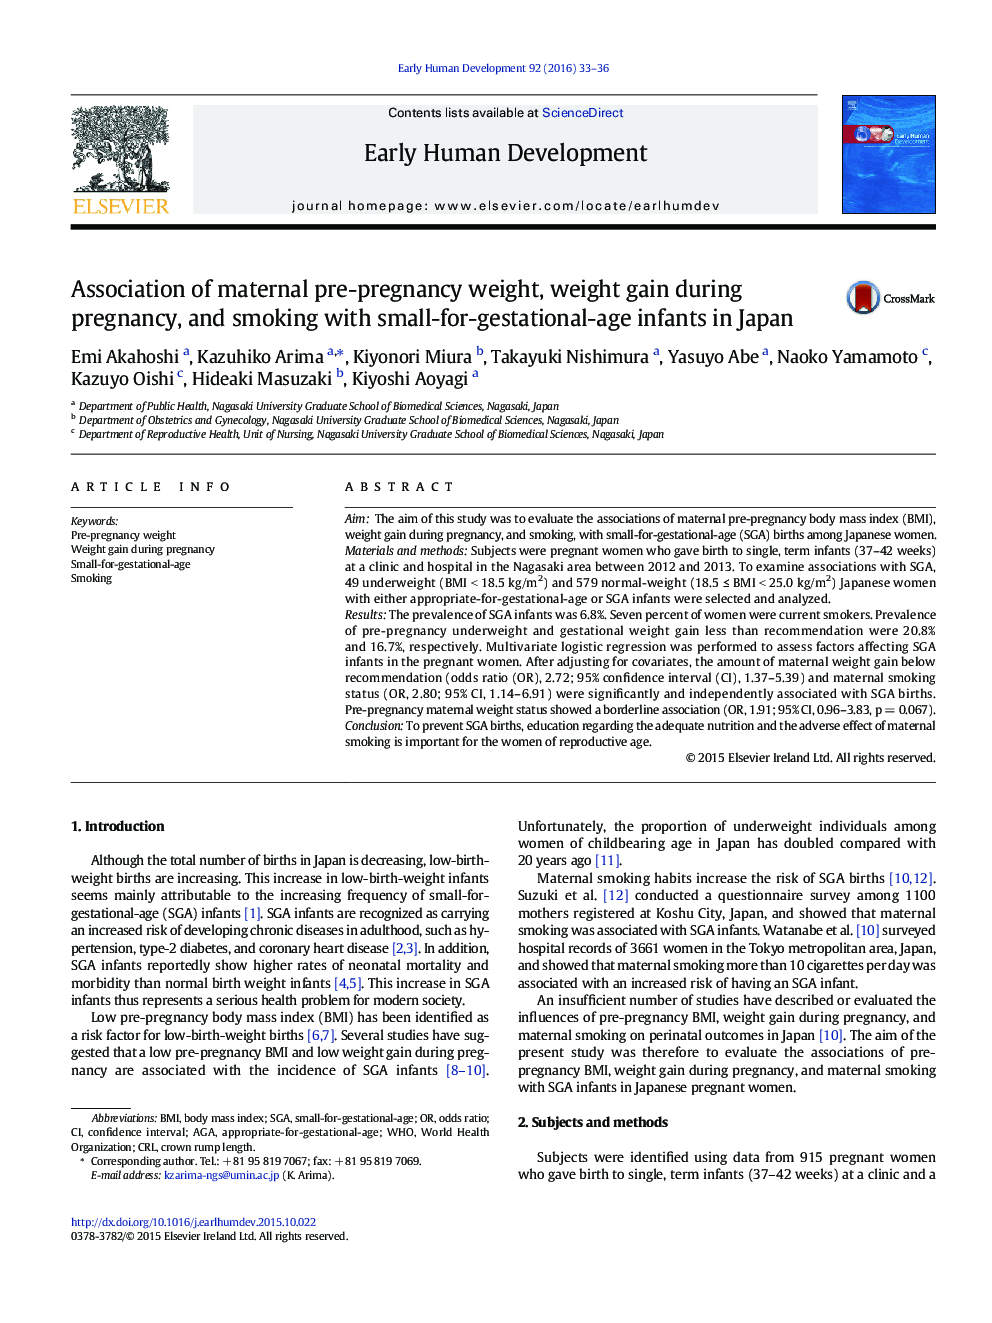 Association of maternal pre-pregnancy weight, weight gain during pregnancy, and smoking with small-for-gestational-age infants in Japan